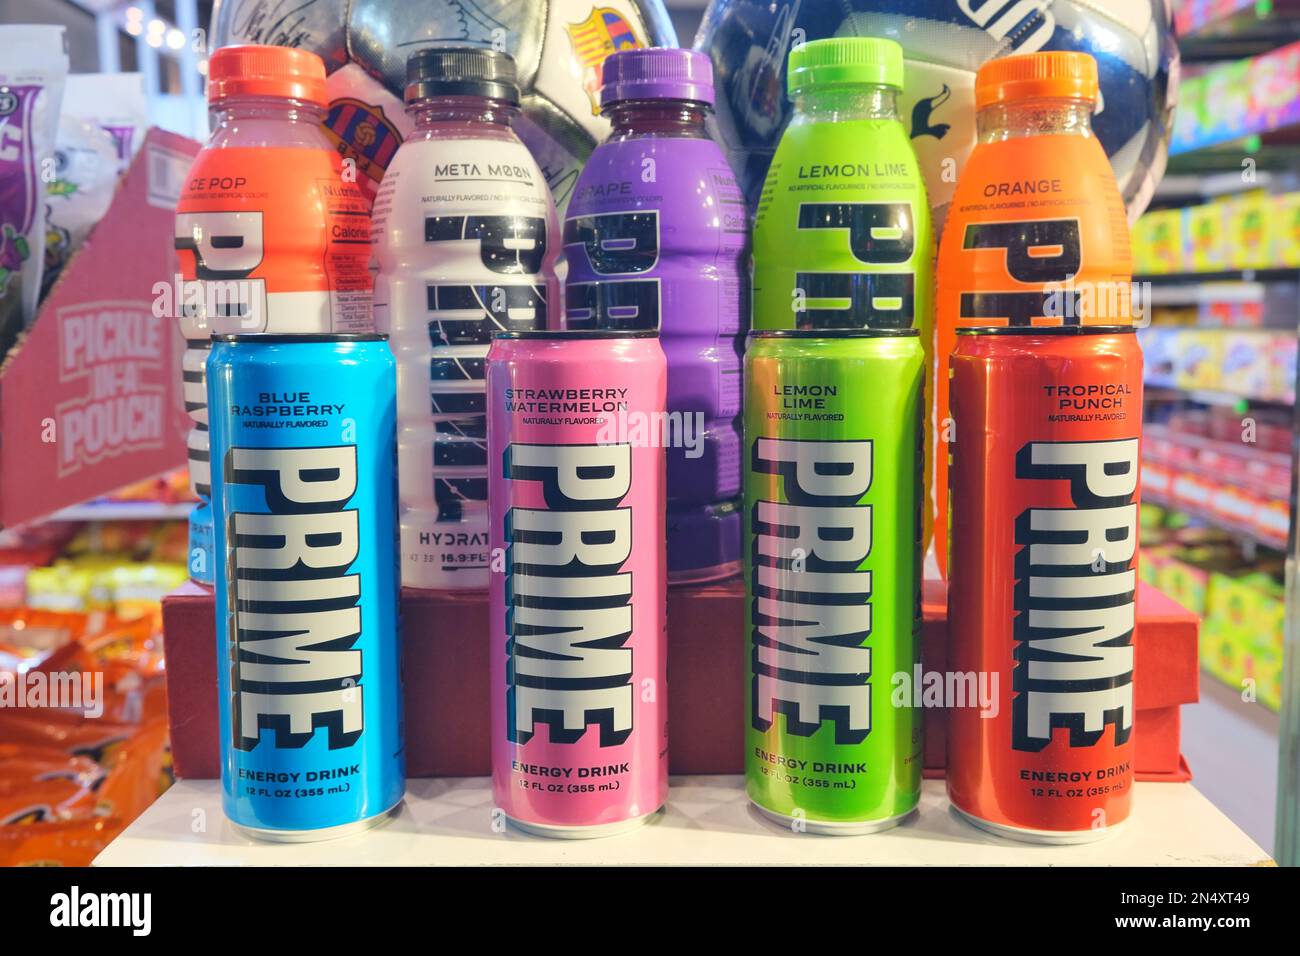 London, UK. A selection of flavours in the Prime Hydration energy drinks range in a shop display. Stock Photo